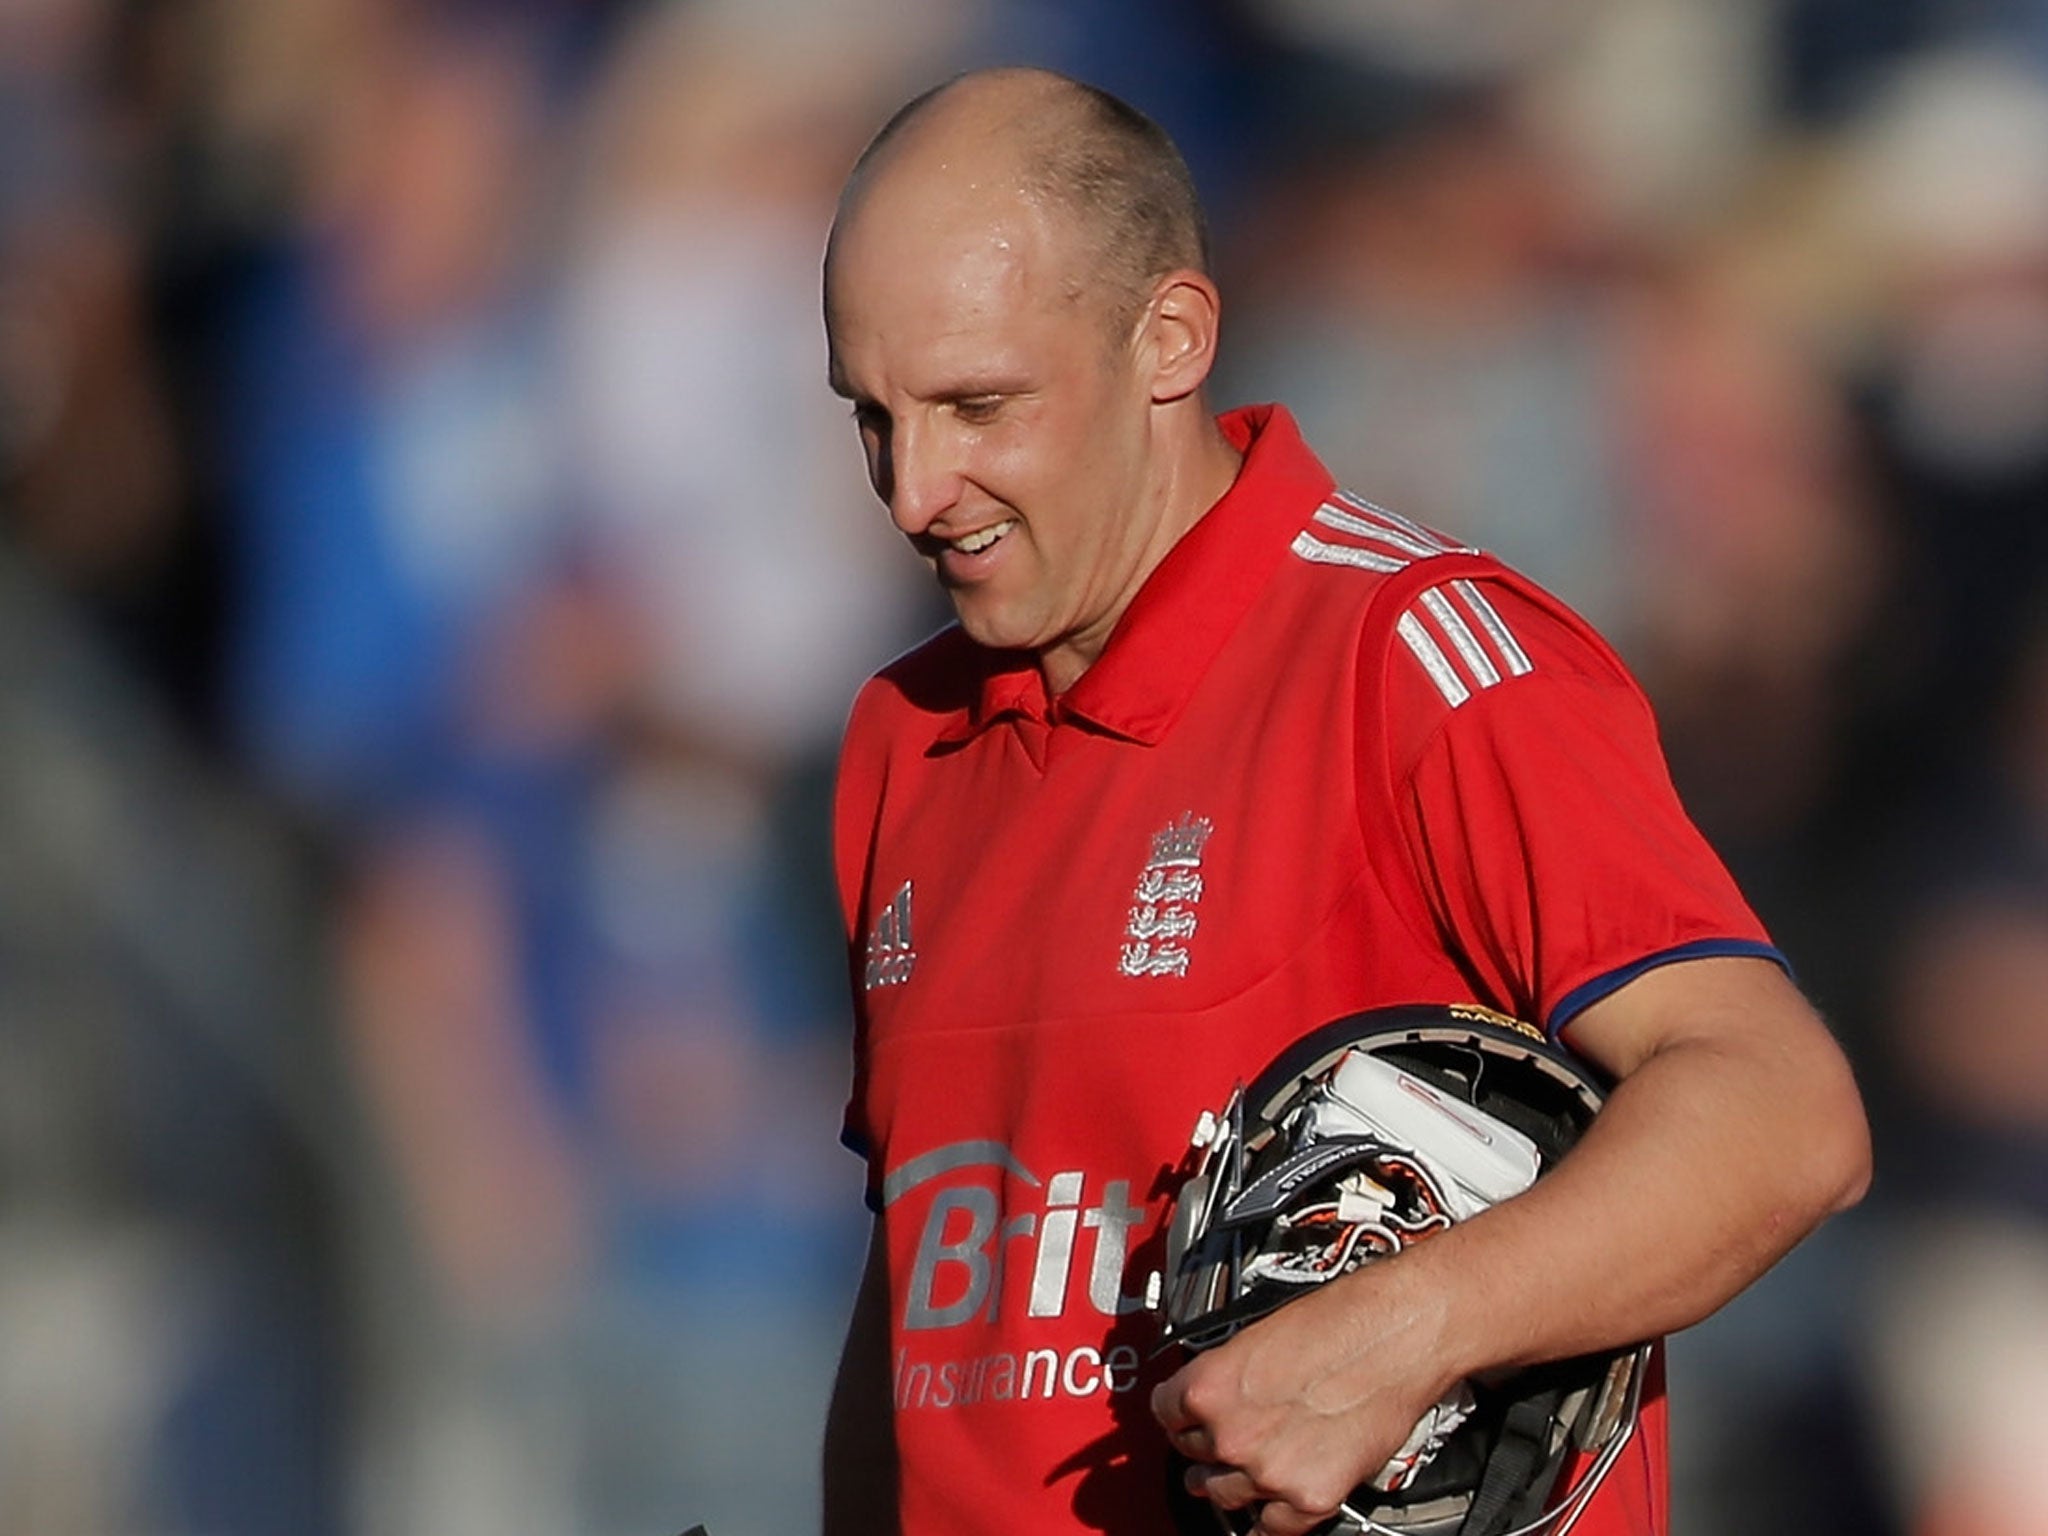 James Tredwell will be available for the final Test in Sydney